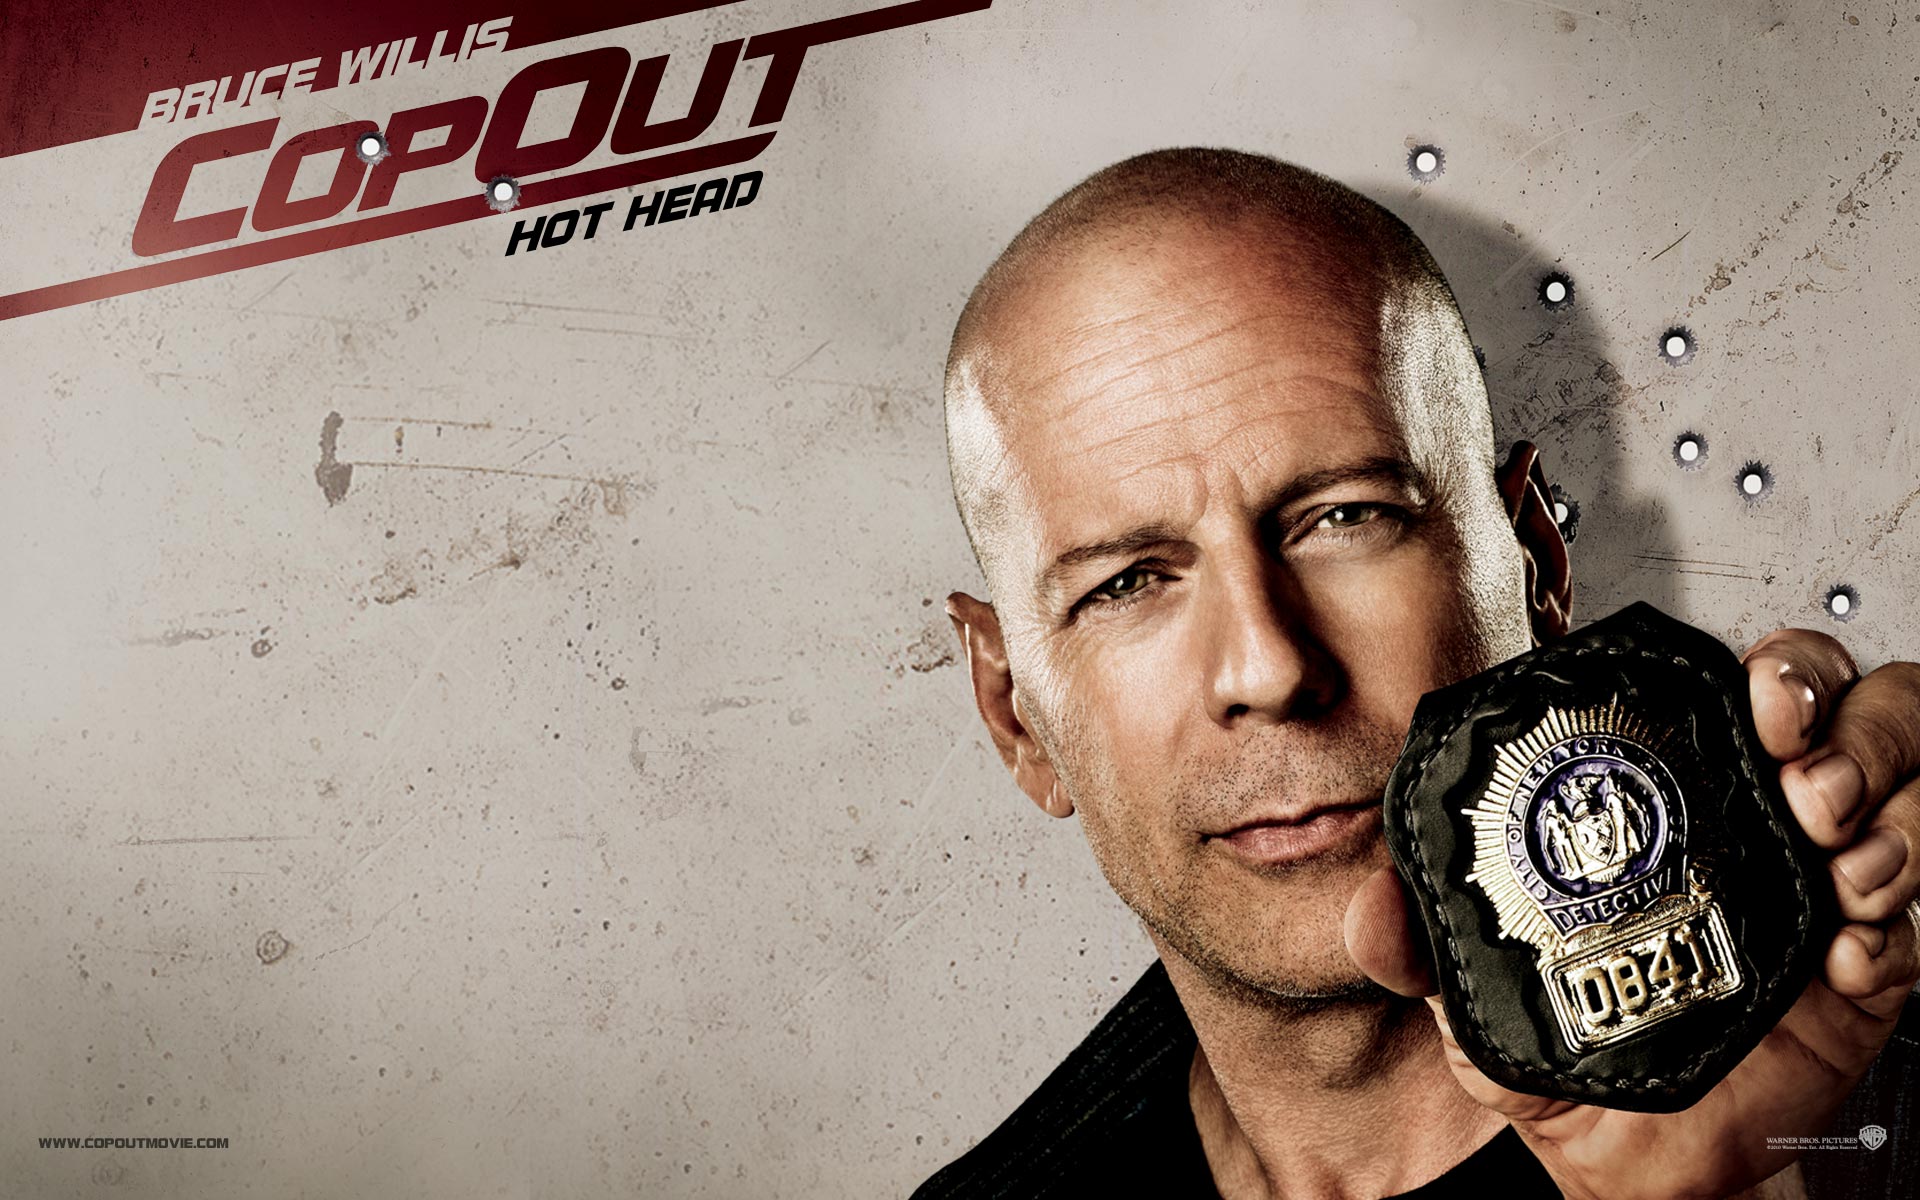 Bruce Willis Wallpapers High Resolution and Quality Download 1920x1200